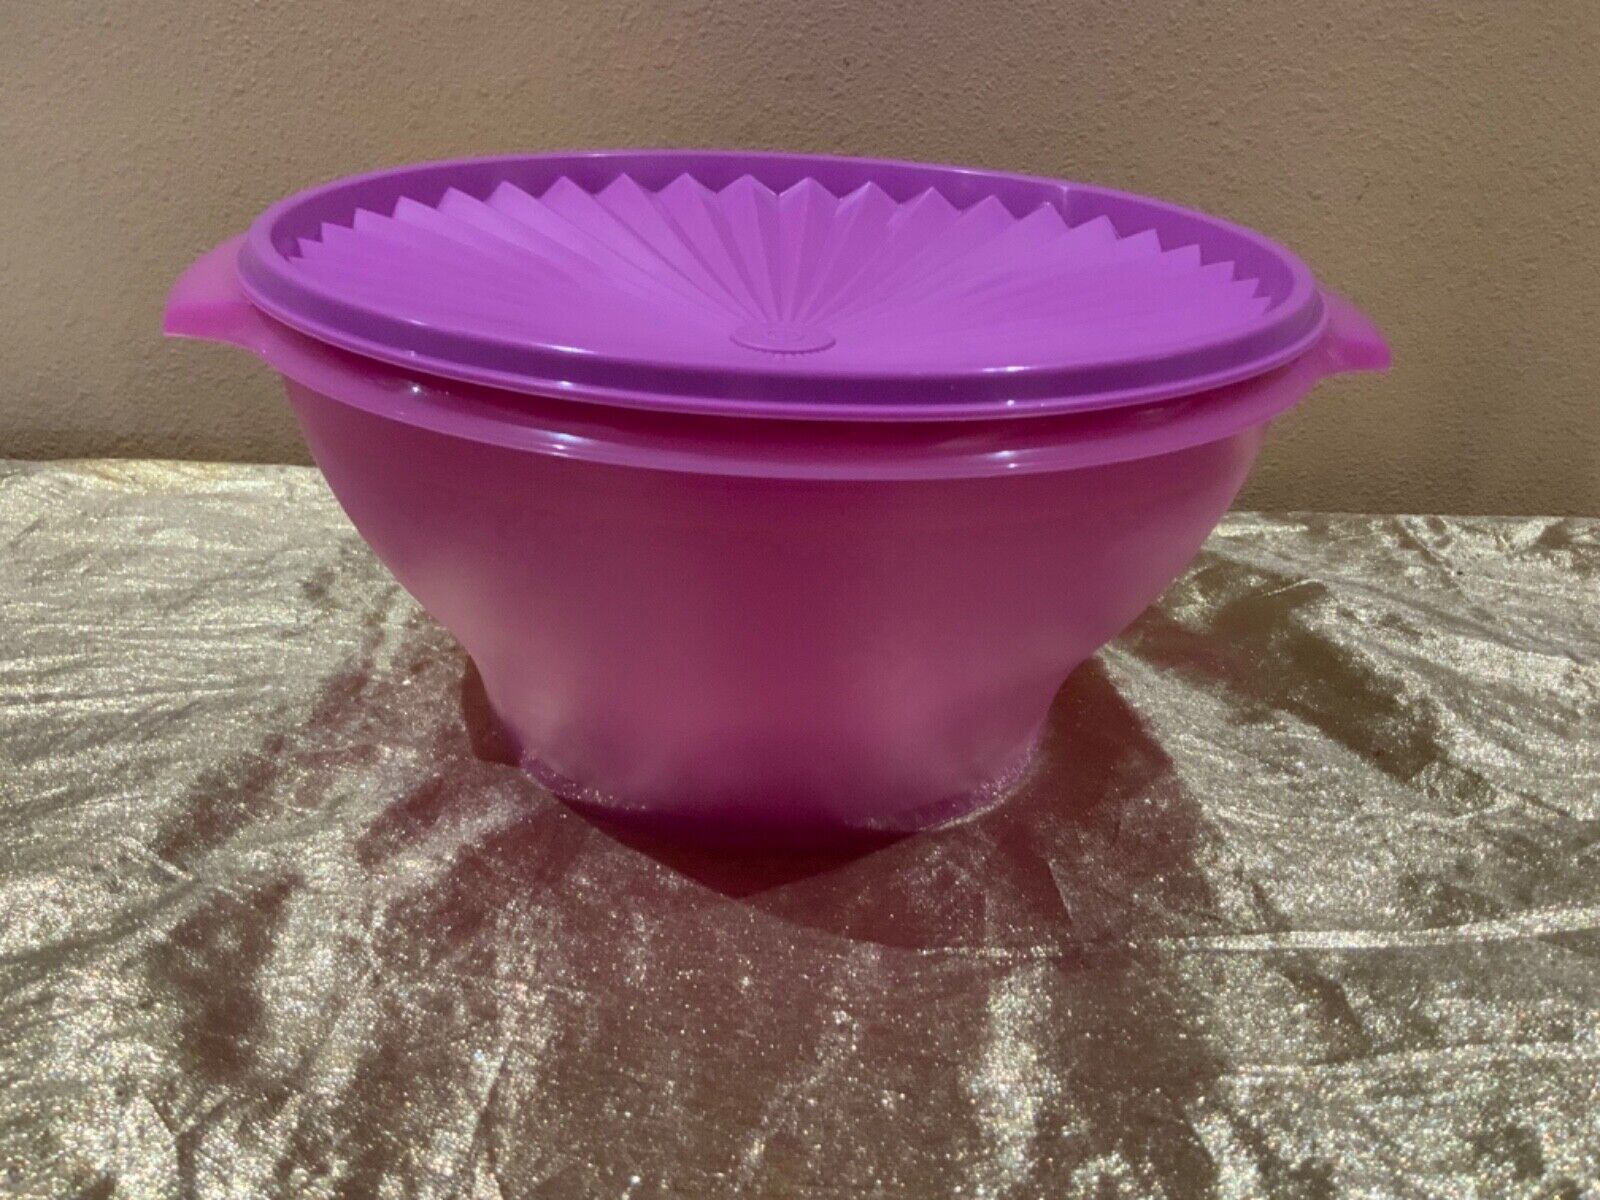 Tupperware New Beautiful Color Large Press and Seal Bowl 4.3L in Purple Shades 